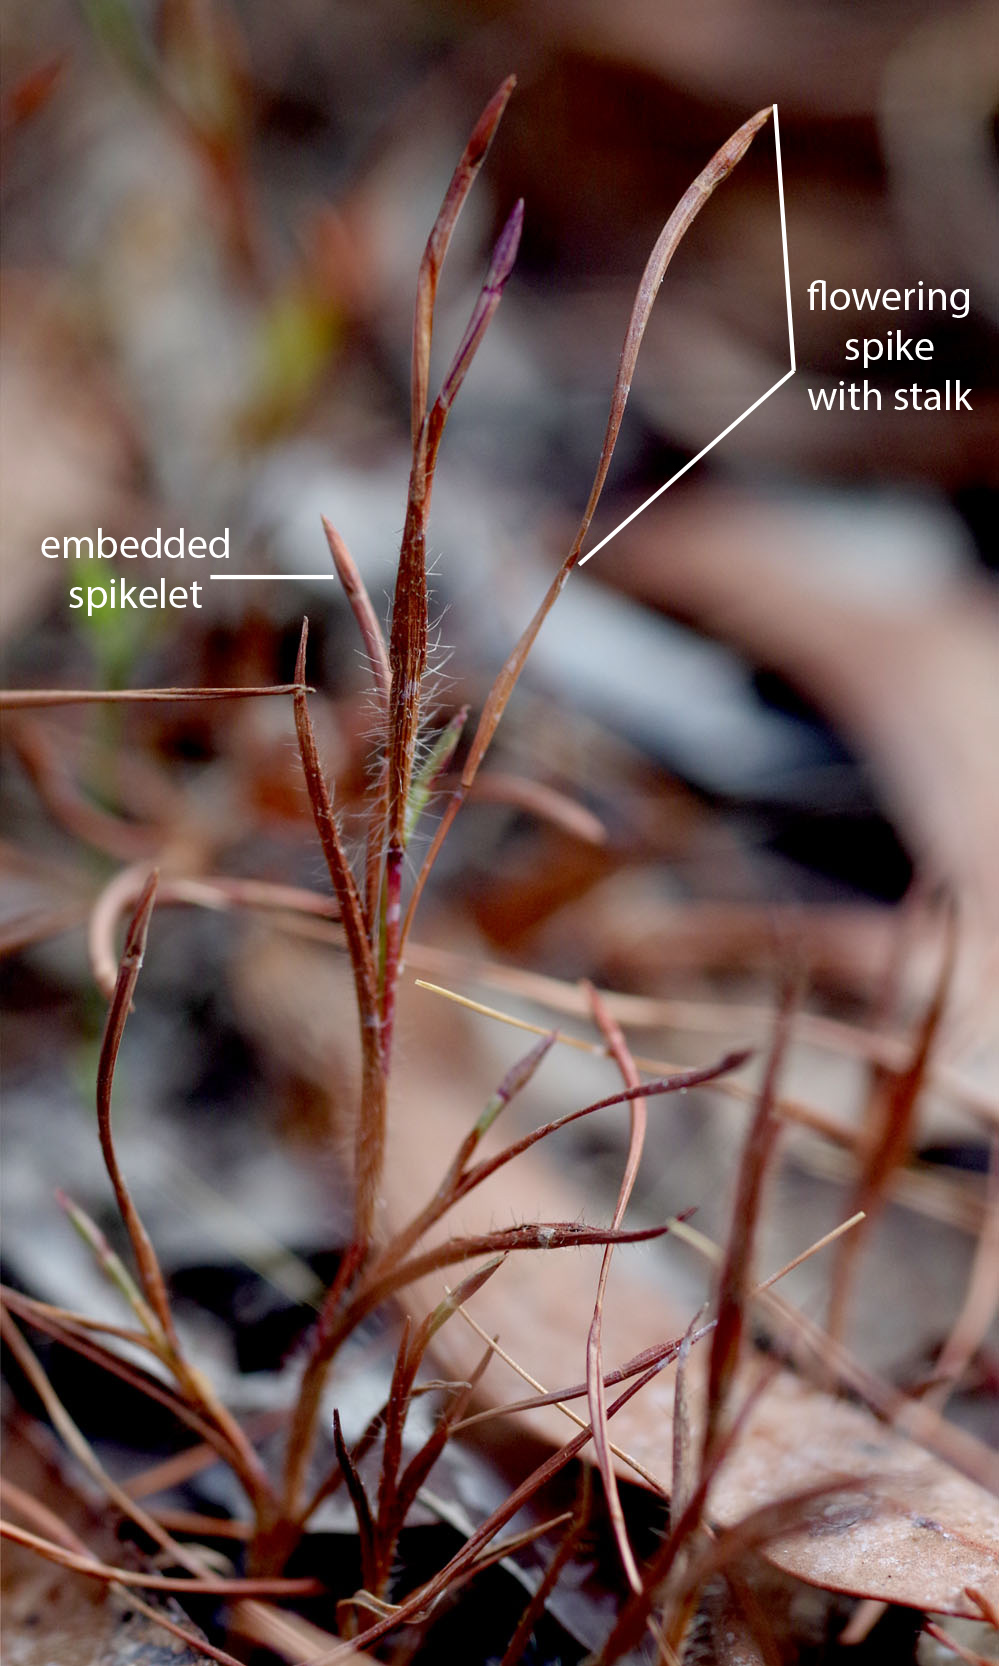 Fig. 1. Image of Thaumastochloa major plant showing reddish brown colouring, elongated flowering stalk and embedded spikelet (CC By: RJ Cummings d77307dsa).